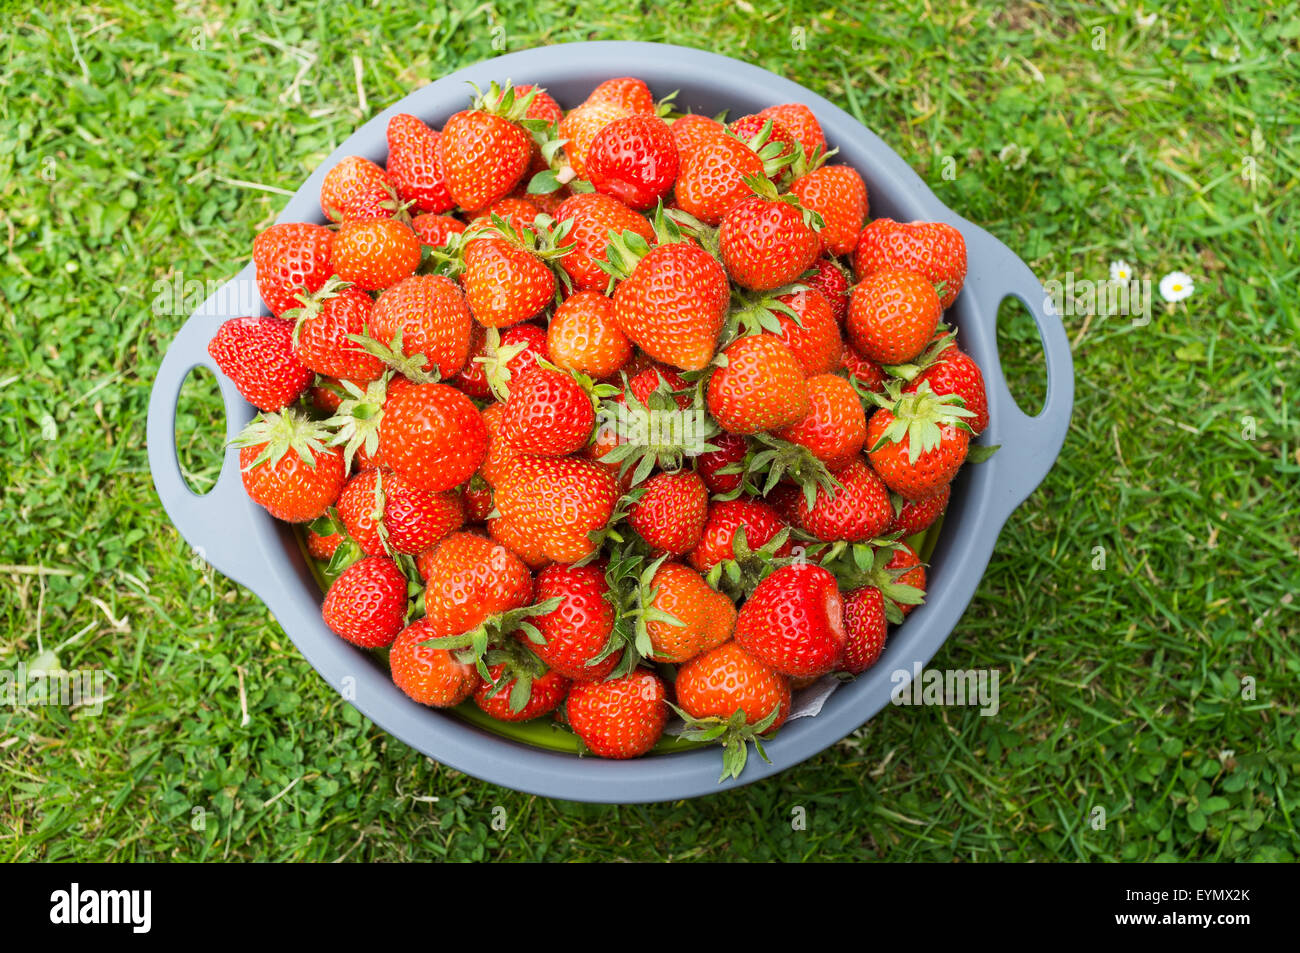 A colander of strawberries on a wooden garden seat after harvesting in a garden. Stock Photo